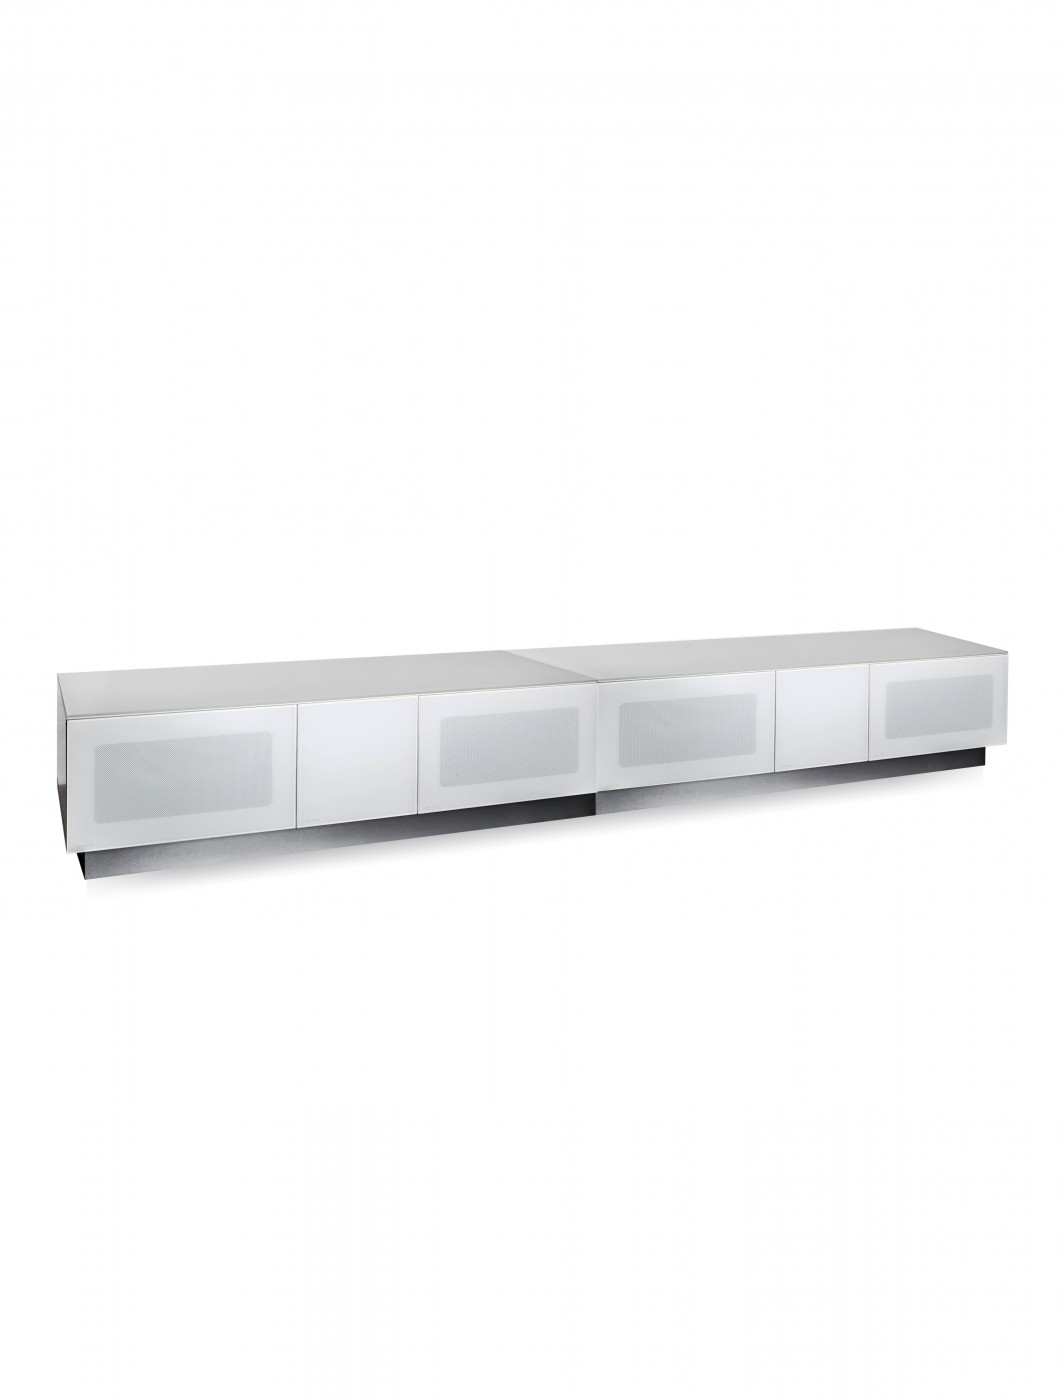 Tv Stand Element Modular Emtmod2500 Whi Tv Cabinet By Alphason